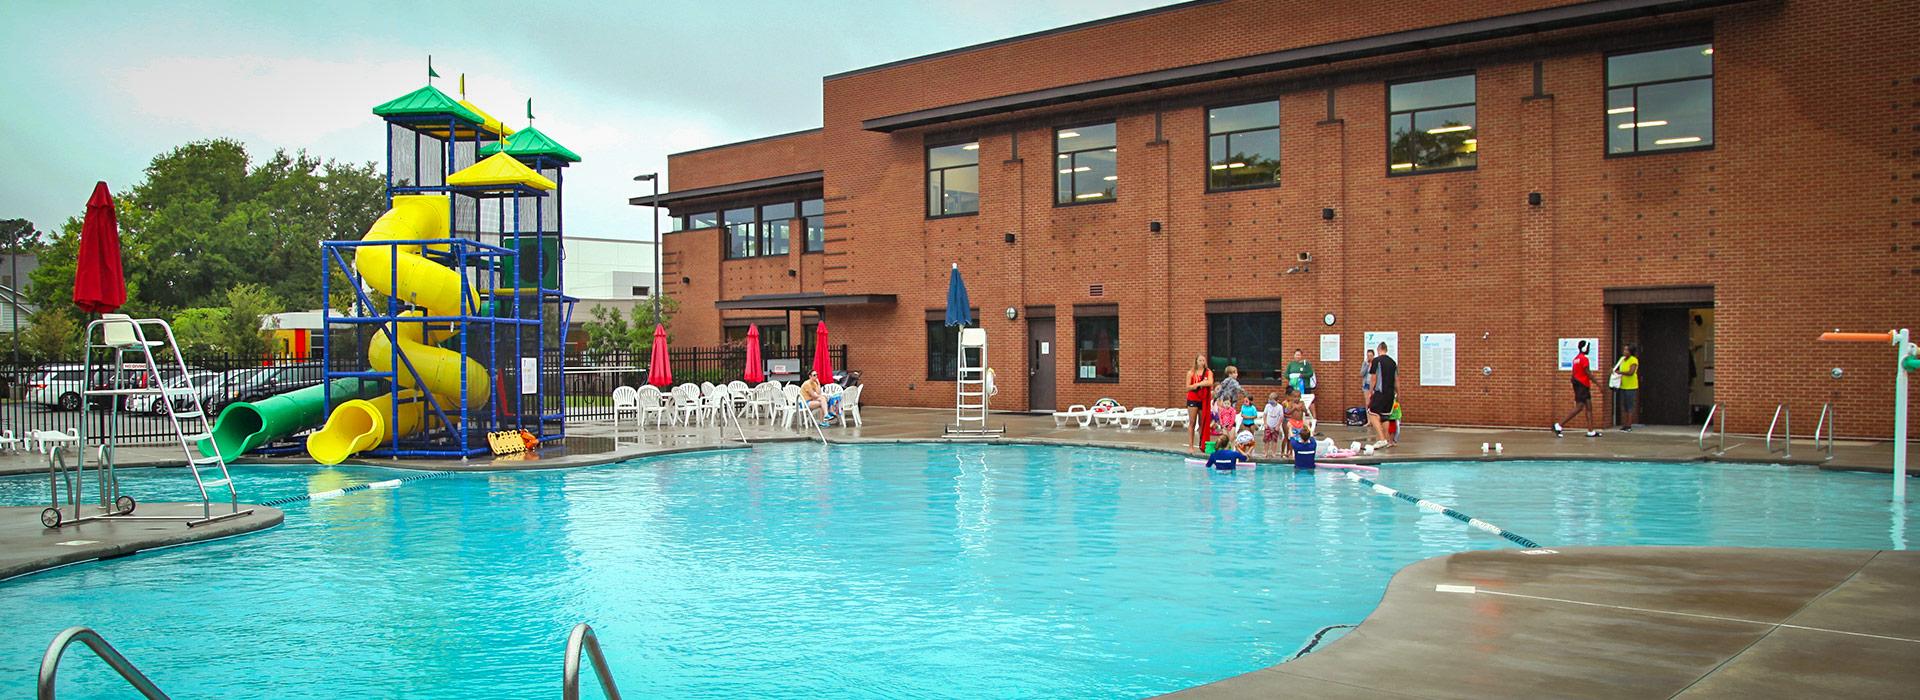 Outdoor pool with splash toys and water slides at the YMCA on Granby